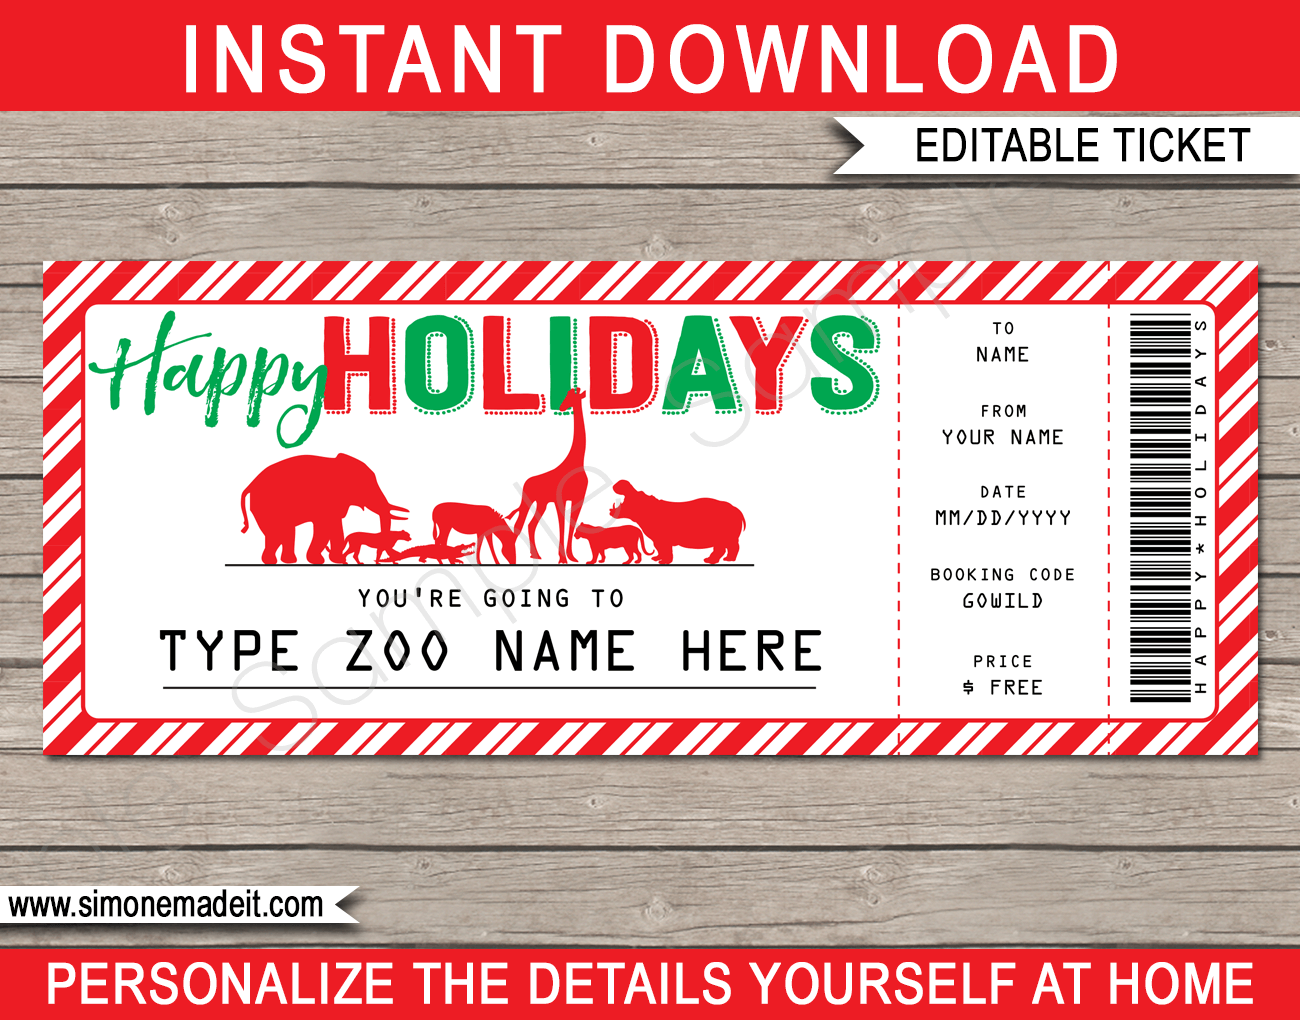 Holiday Zoo Tickets Gift Voucher Template Surprise tickets to the Zoo